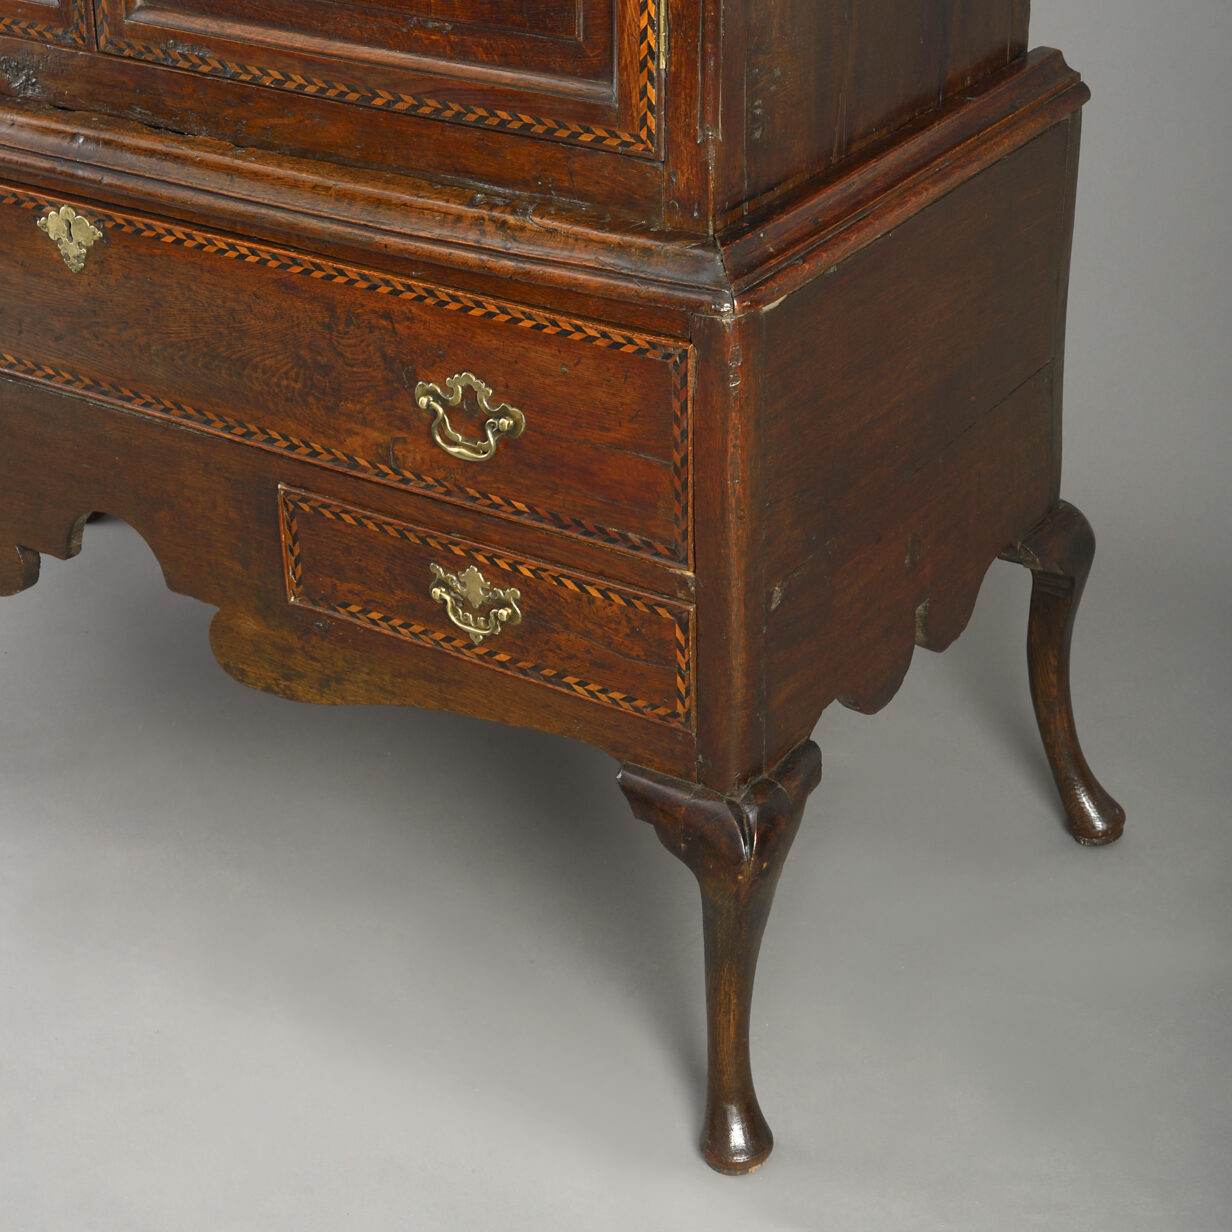 Early 18th century double domed oak cabinet on stand